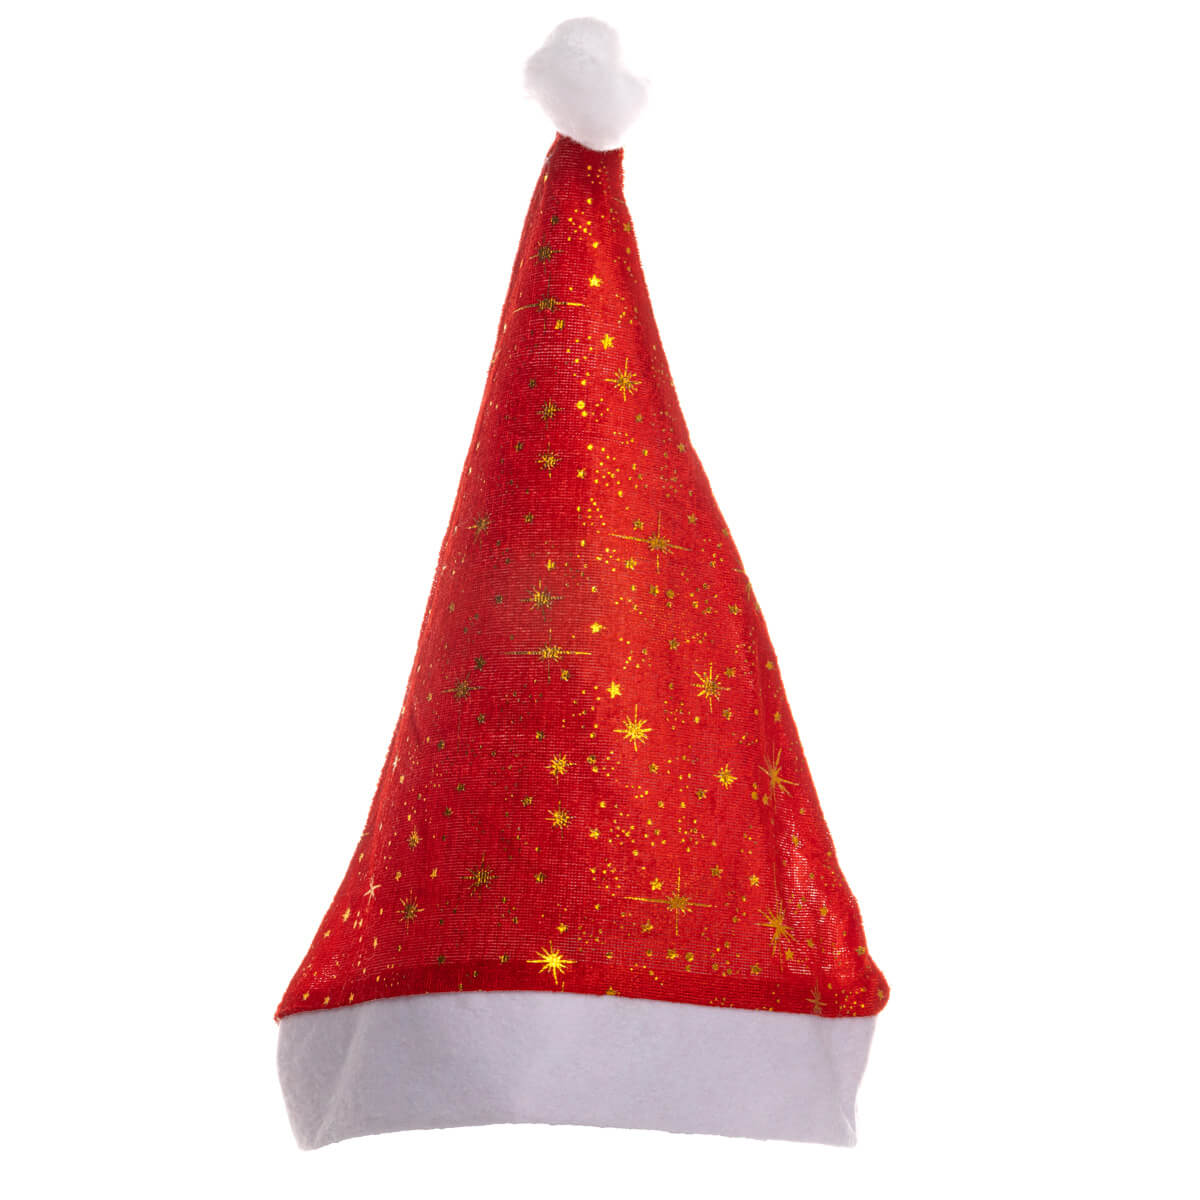 Red elfin cap with star pattern